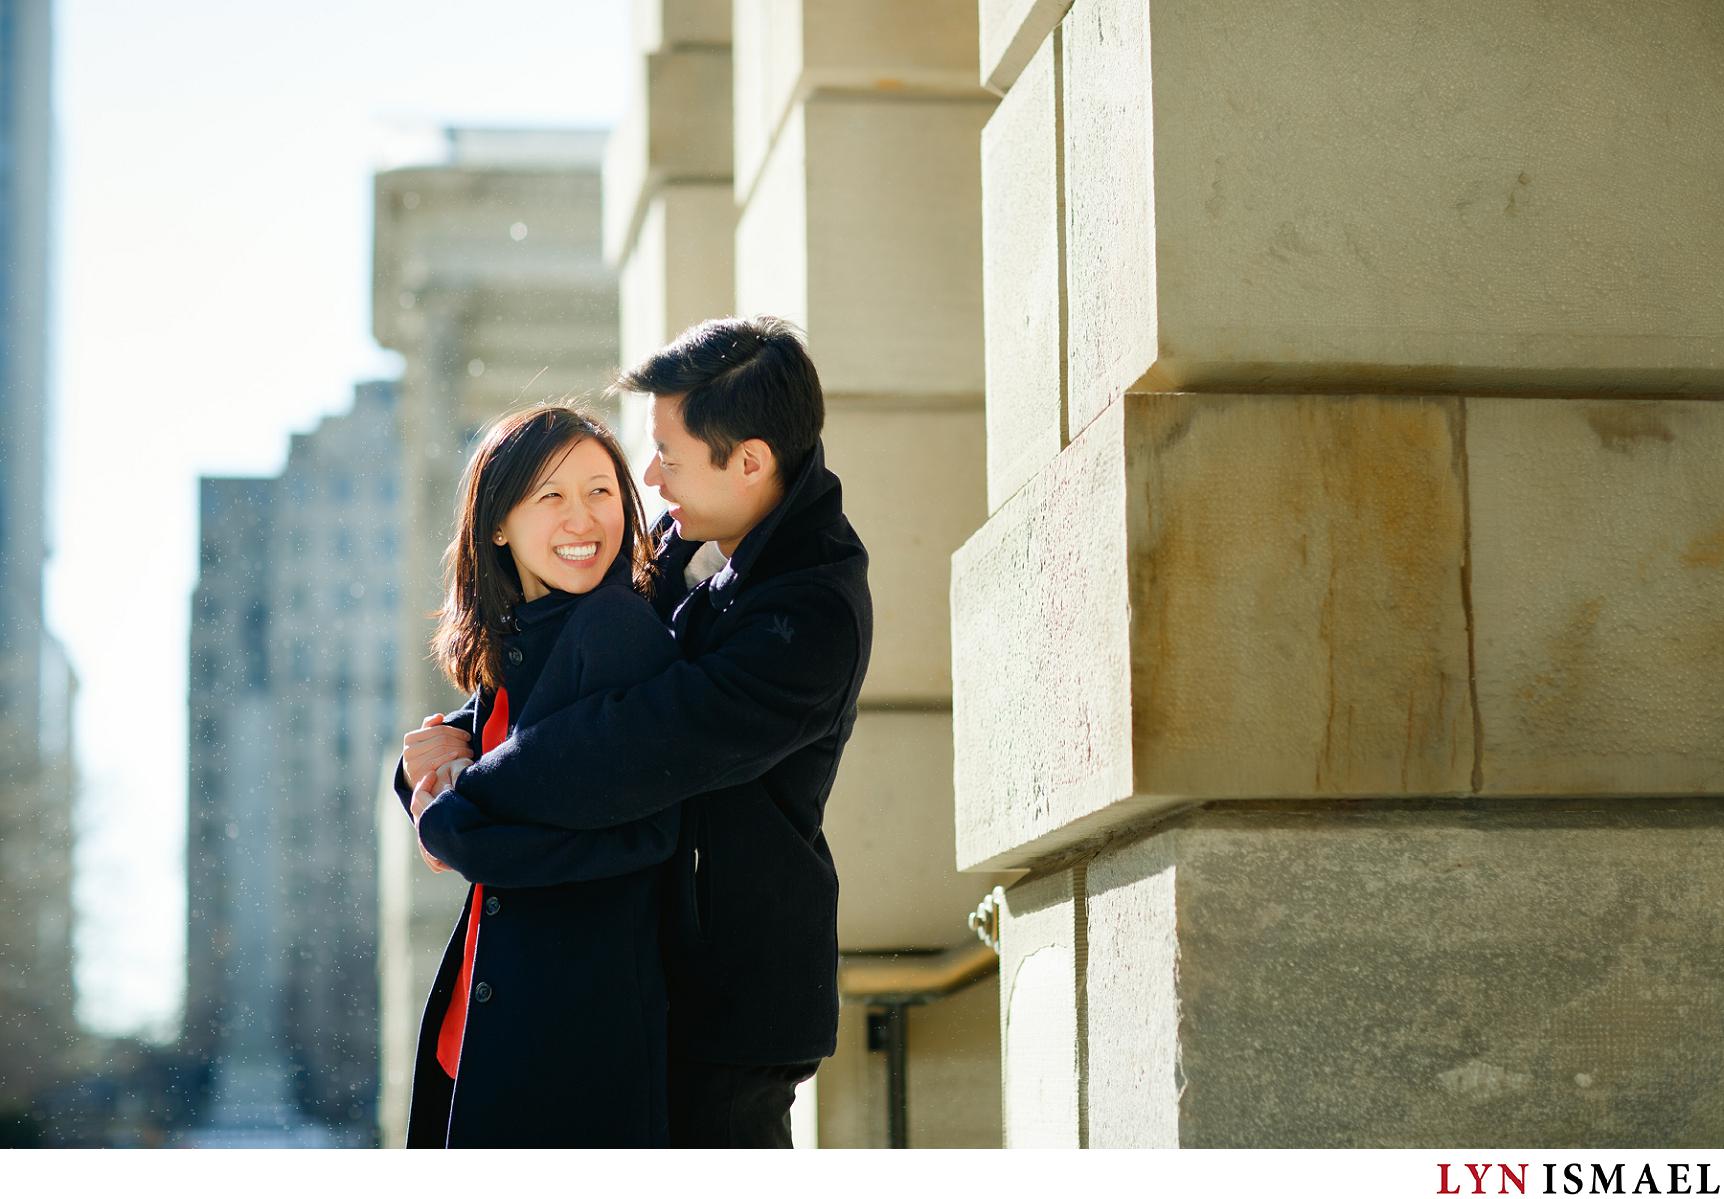 An Asian couple had their engagement session in front of Osgood Hall, a building close to Nathan Phillips Square in Toronto, Ontario.